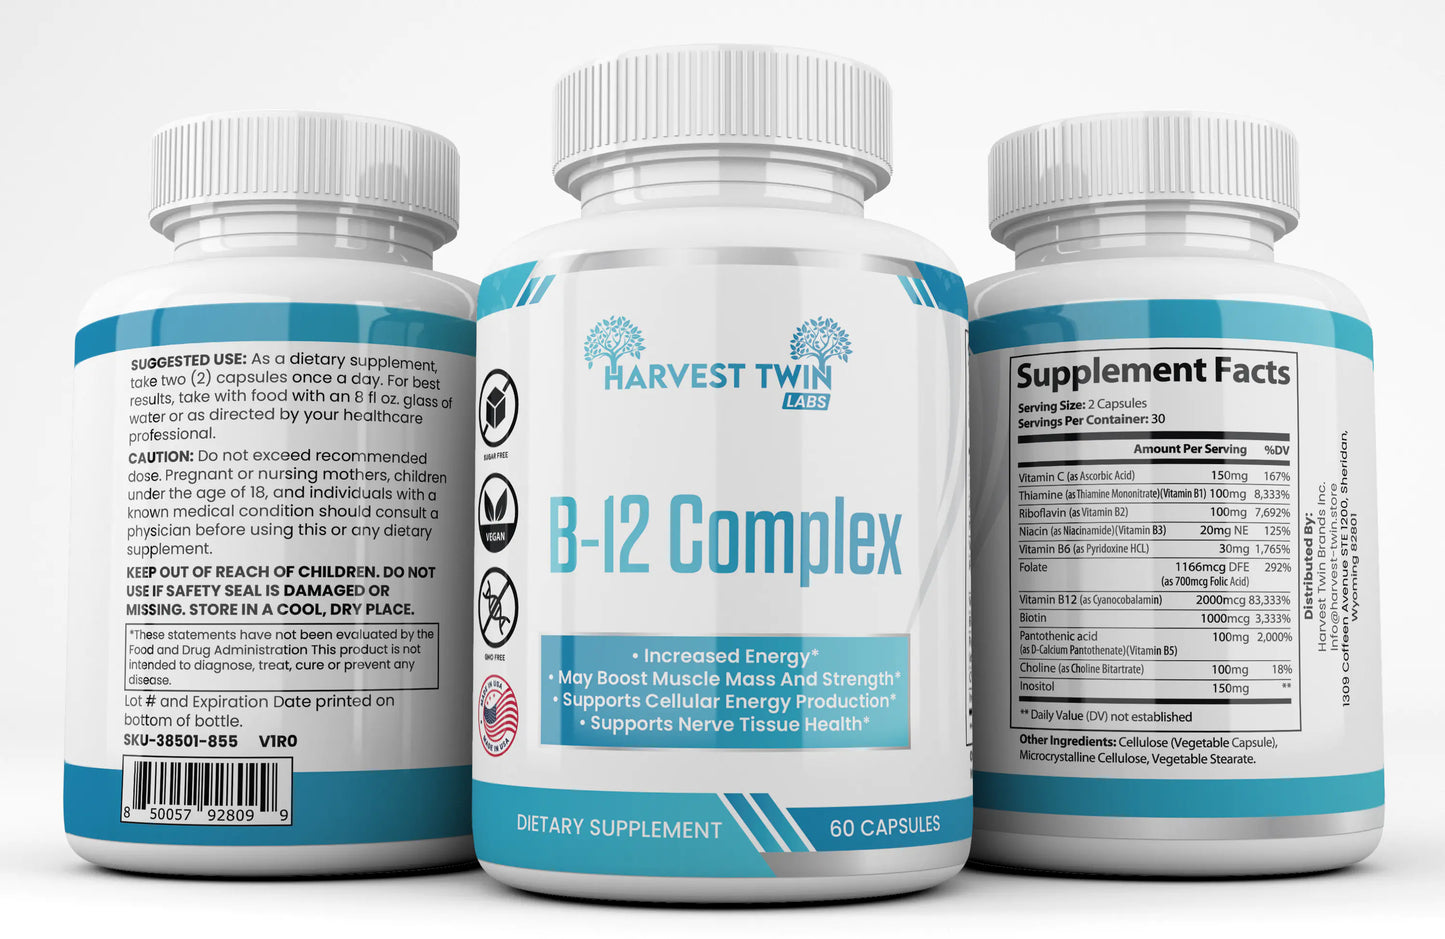 B-12 Complex Vitamin Supplement for Increased Energy & Vitality